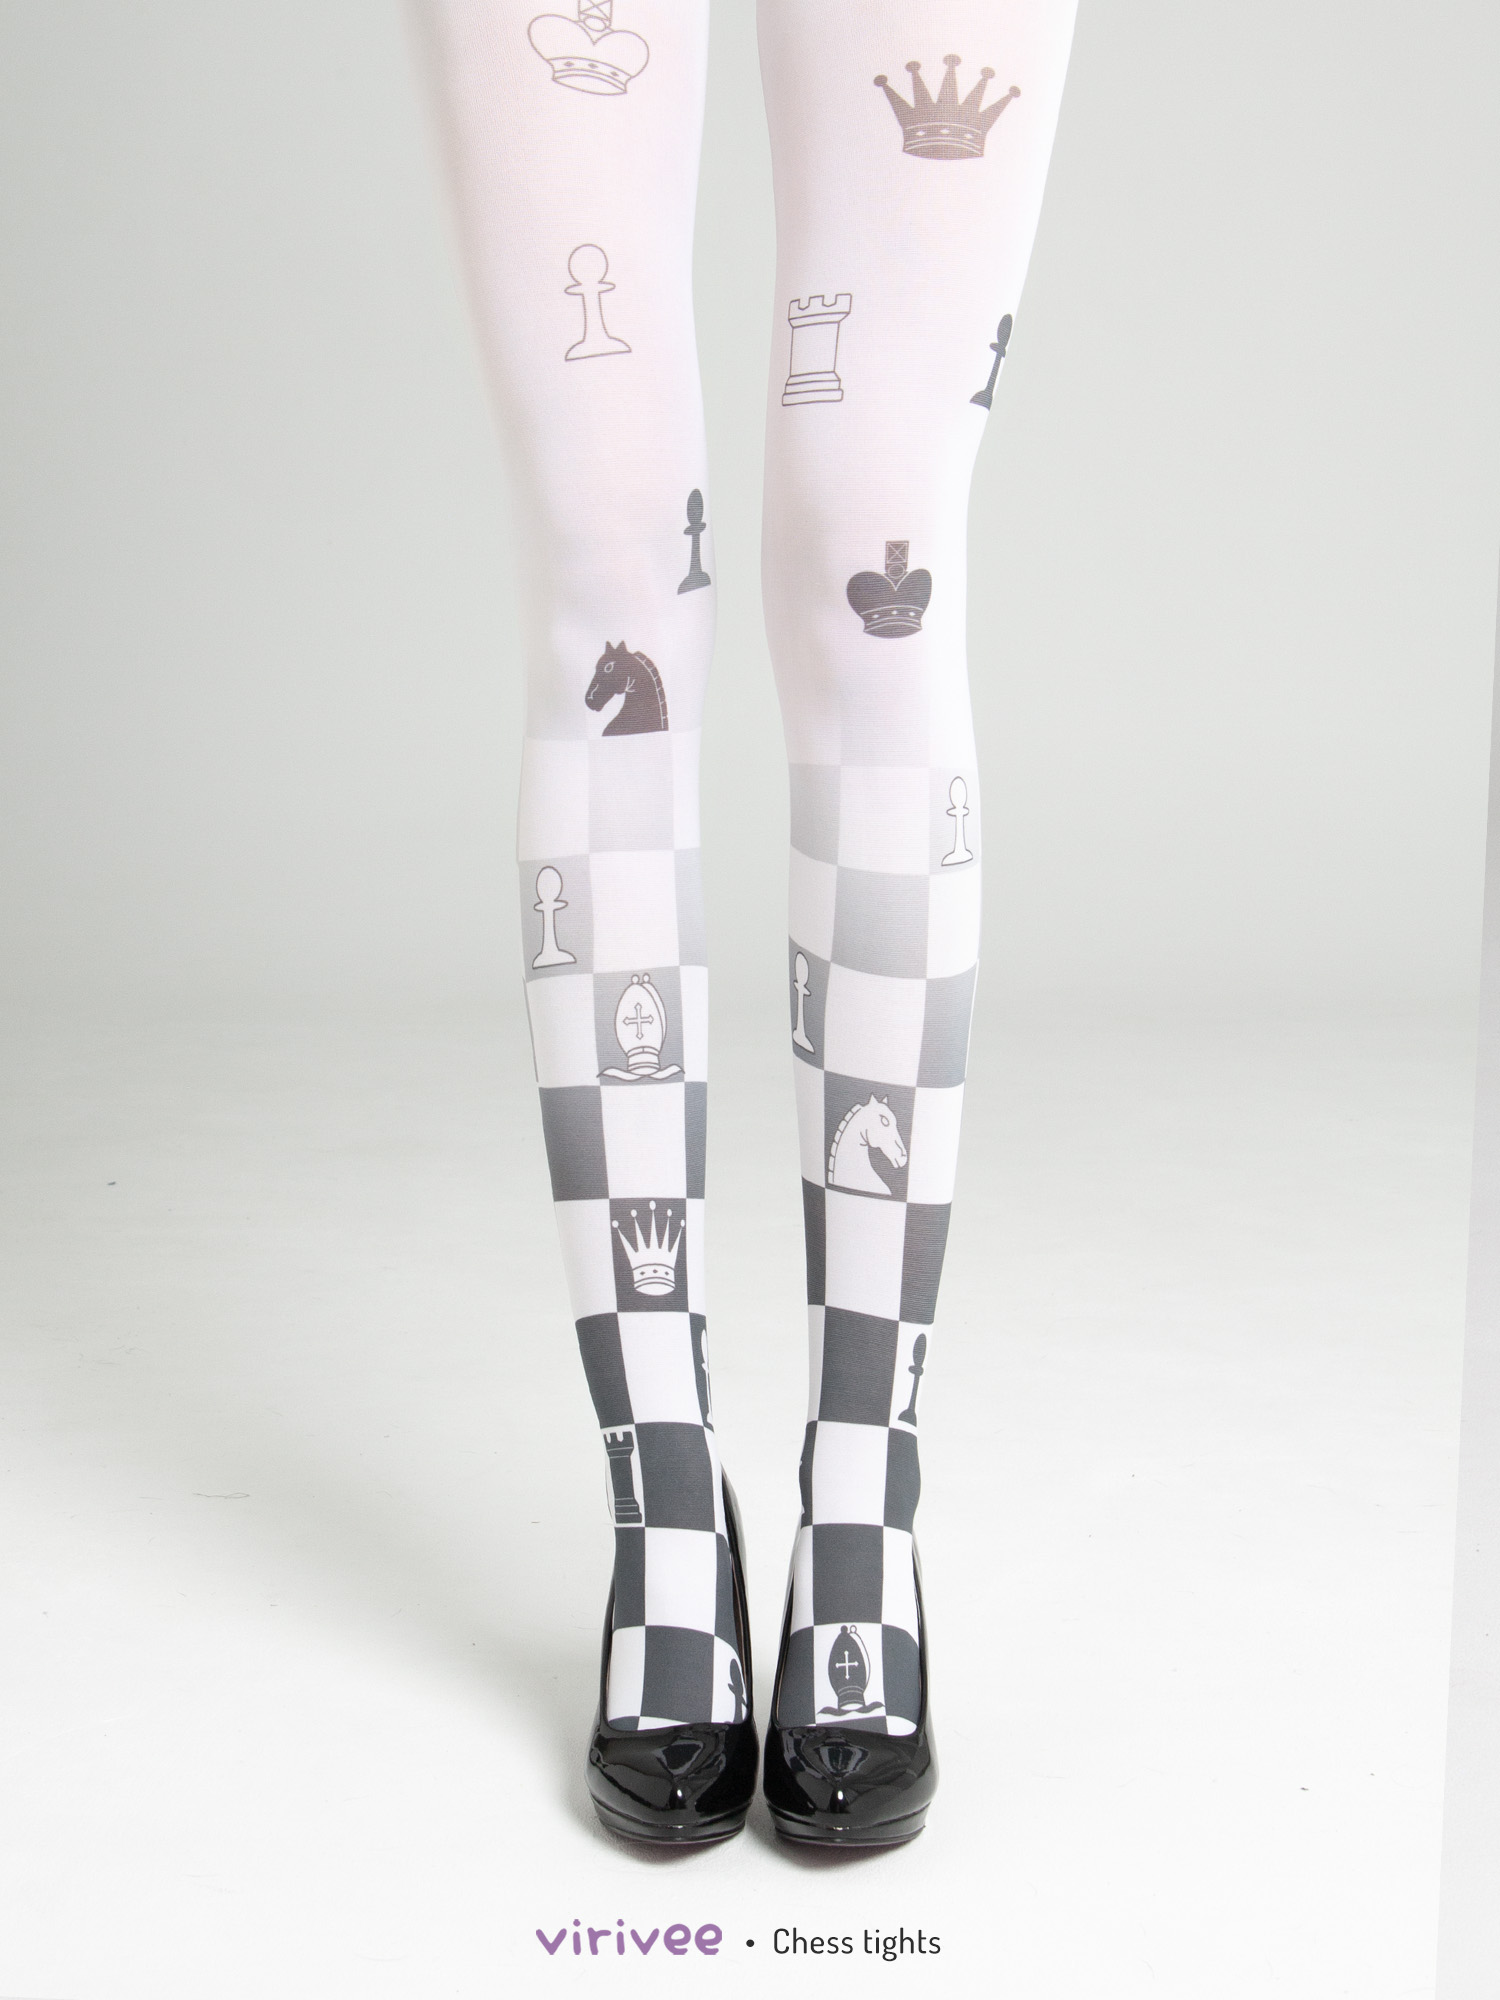 Chess tights in S-4XL sizes